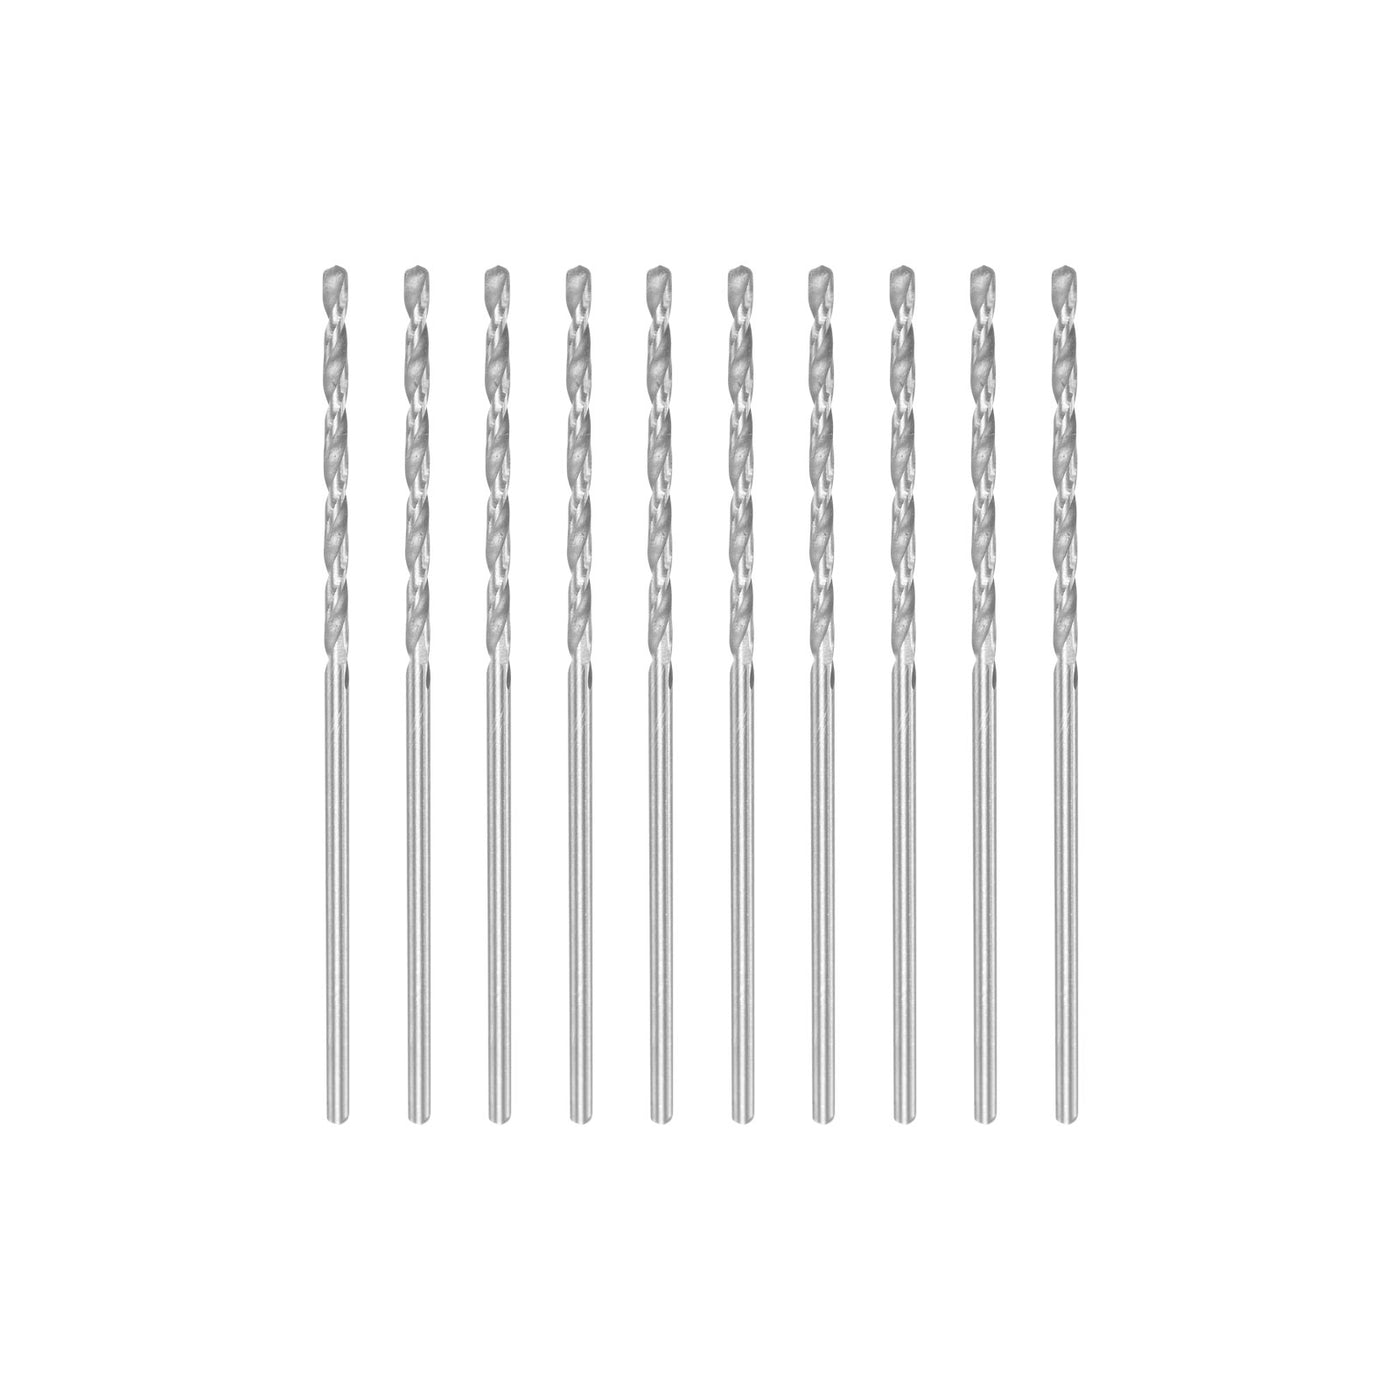 uxcell Uxcell 10 Pcs 1.35mm High Speed Steel Drill Bits, Fully Ground 48mm Length Drill Bit